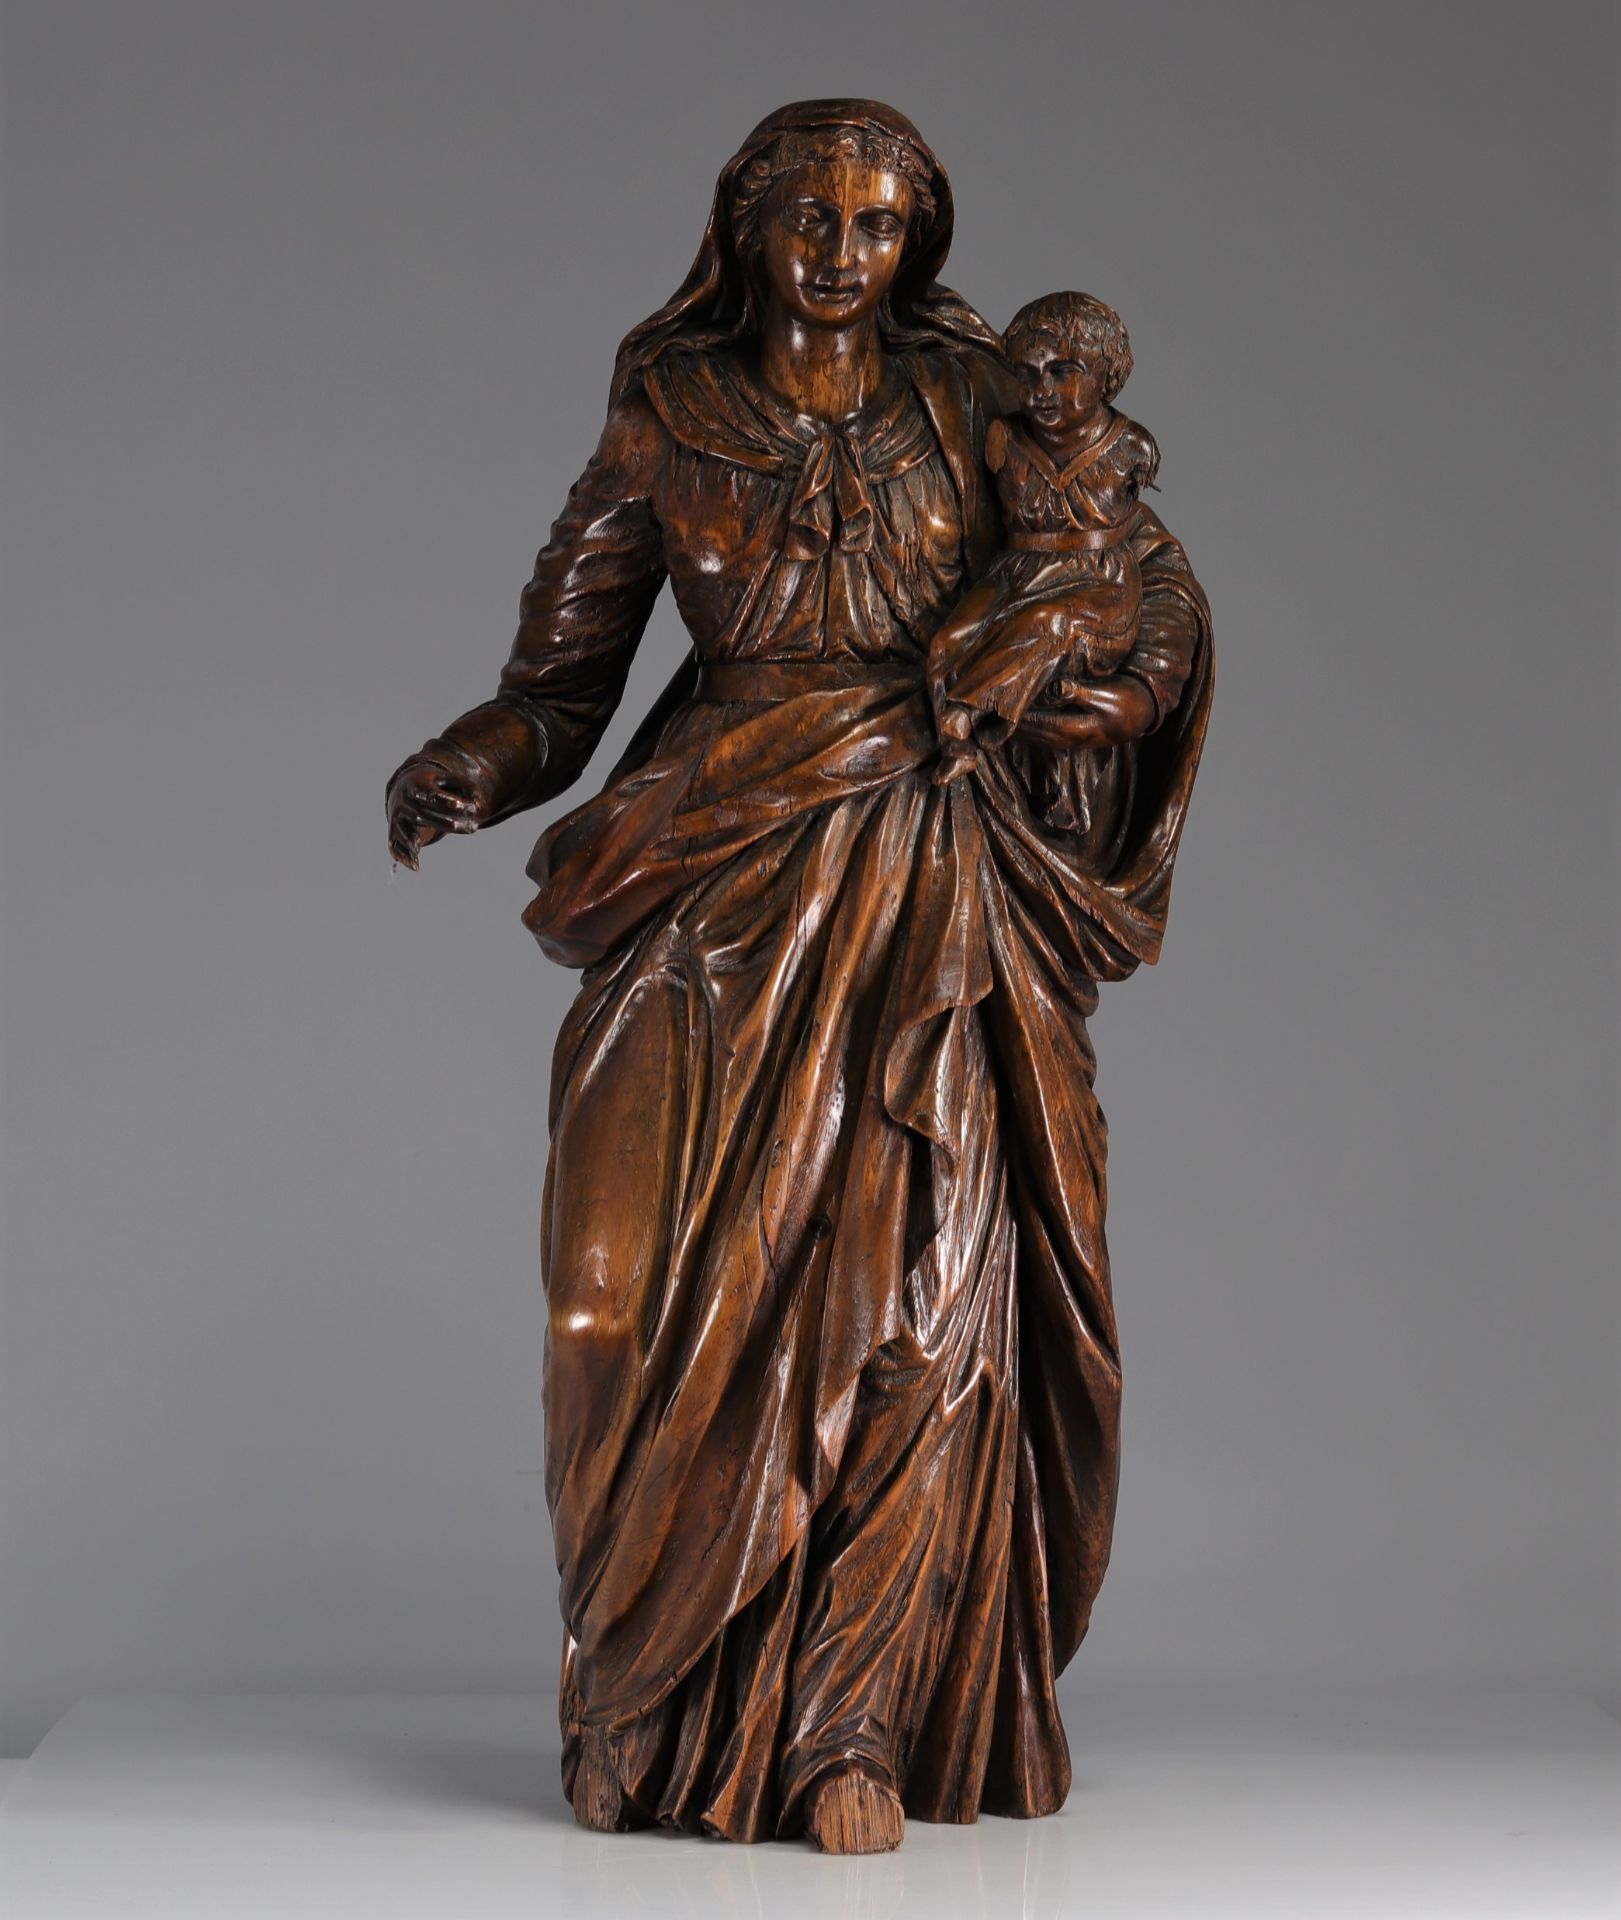 Large Virgin and Child in carved wood from Flanders, Belgium 17th century - Image 4 of 7